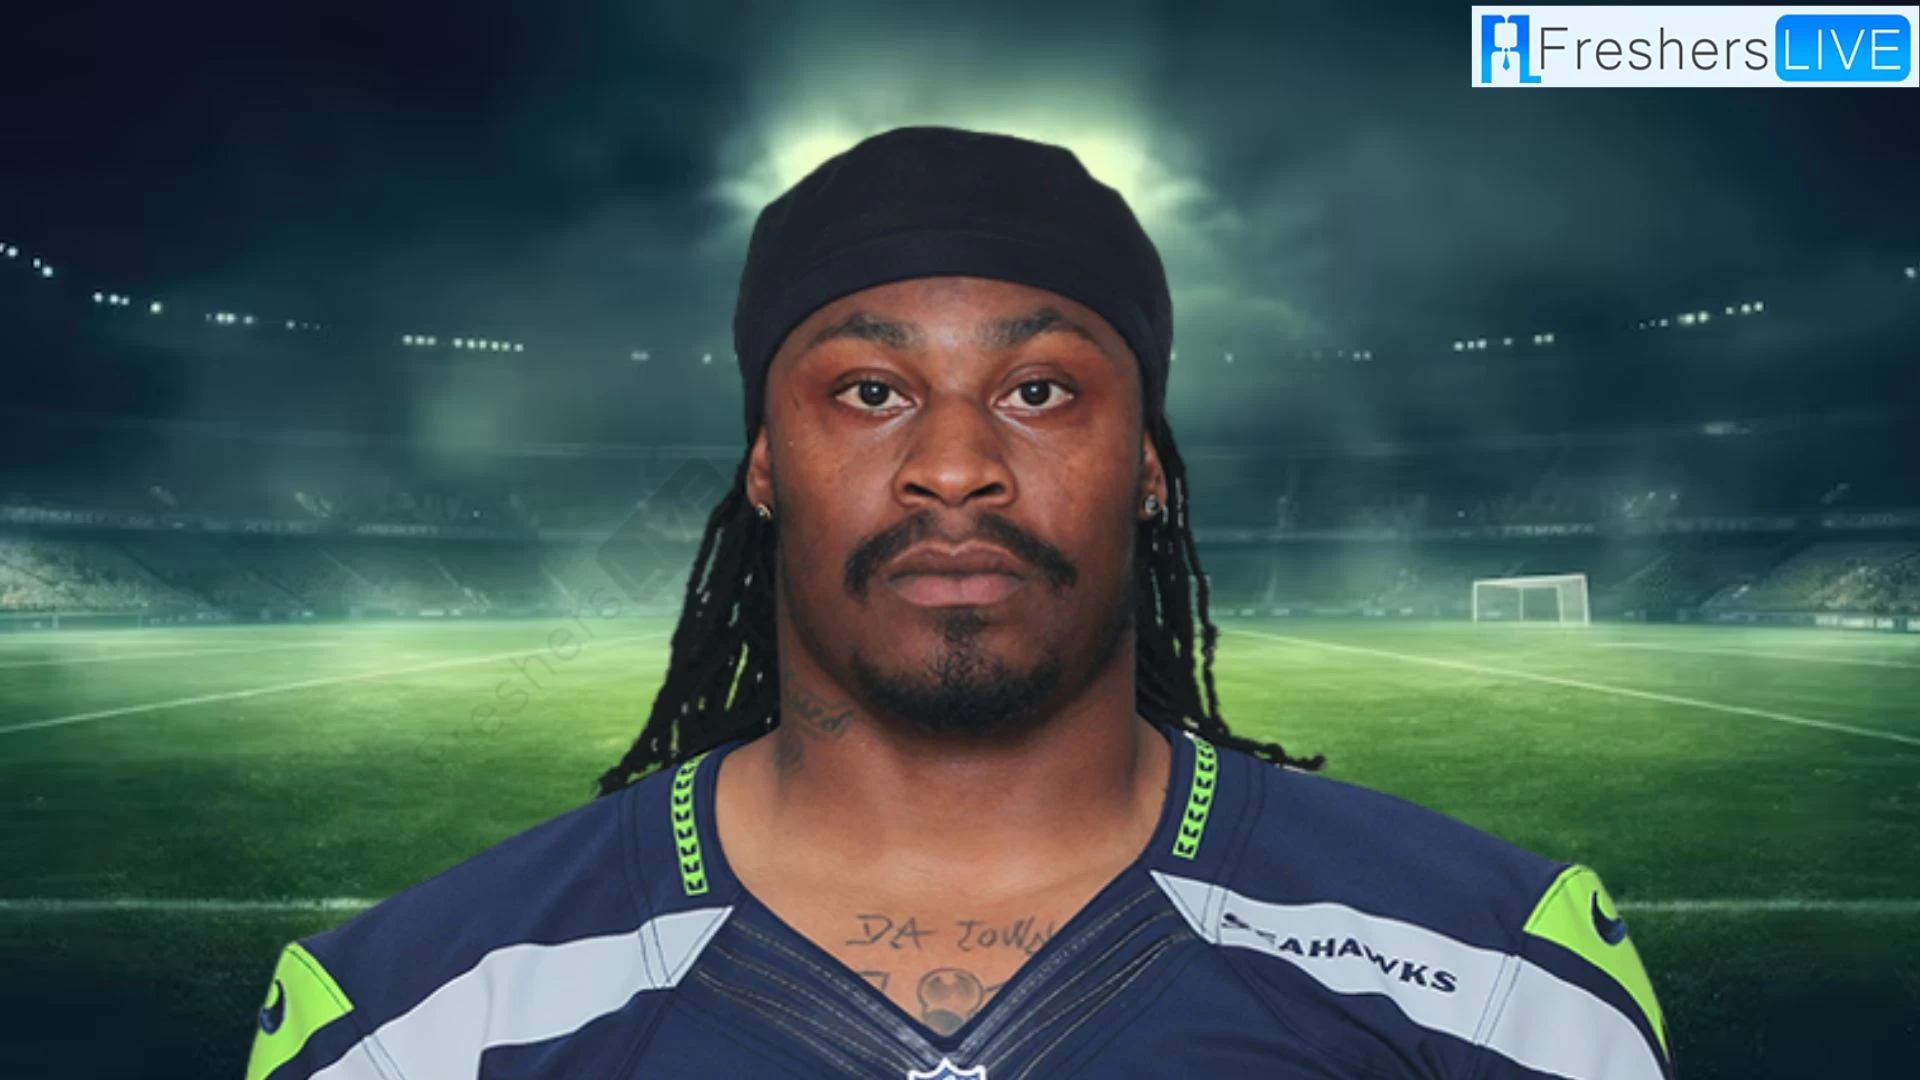 Does Marshawn Lynch Have Kids? Who is Marshawn Lynch? Marshawn Lynch's Age, Parents and More